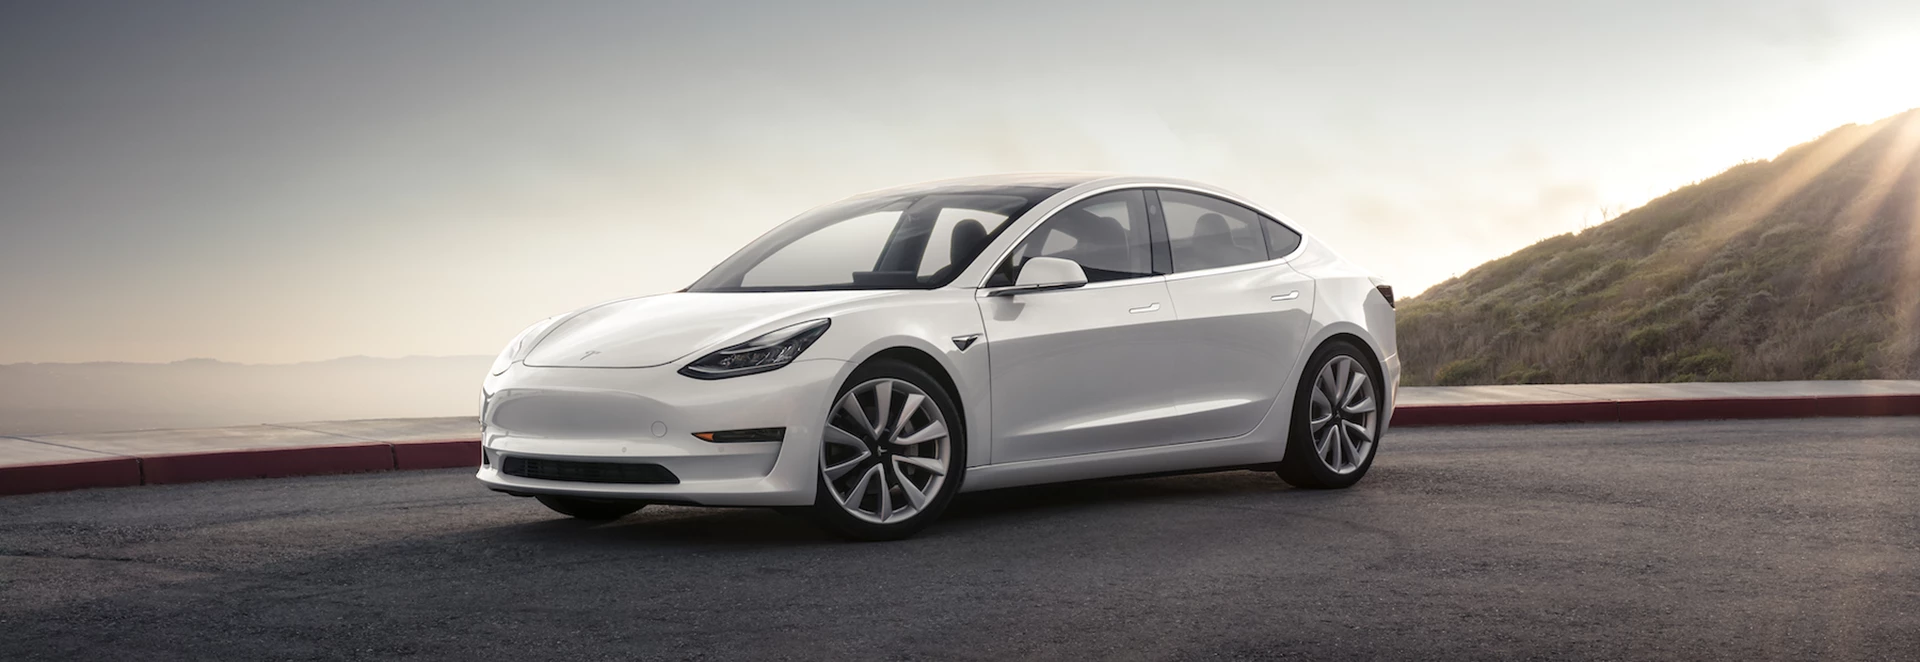 The Tesla Model 3 is now Britain’s third most popular cars